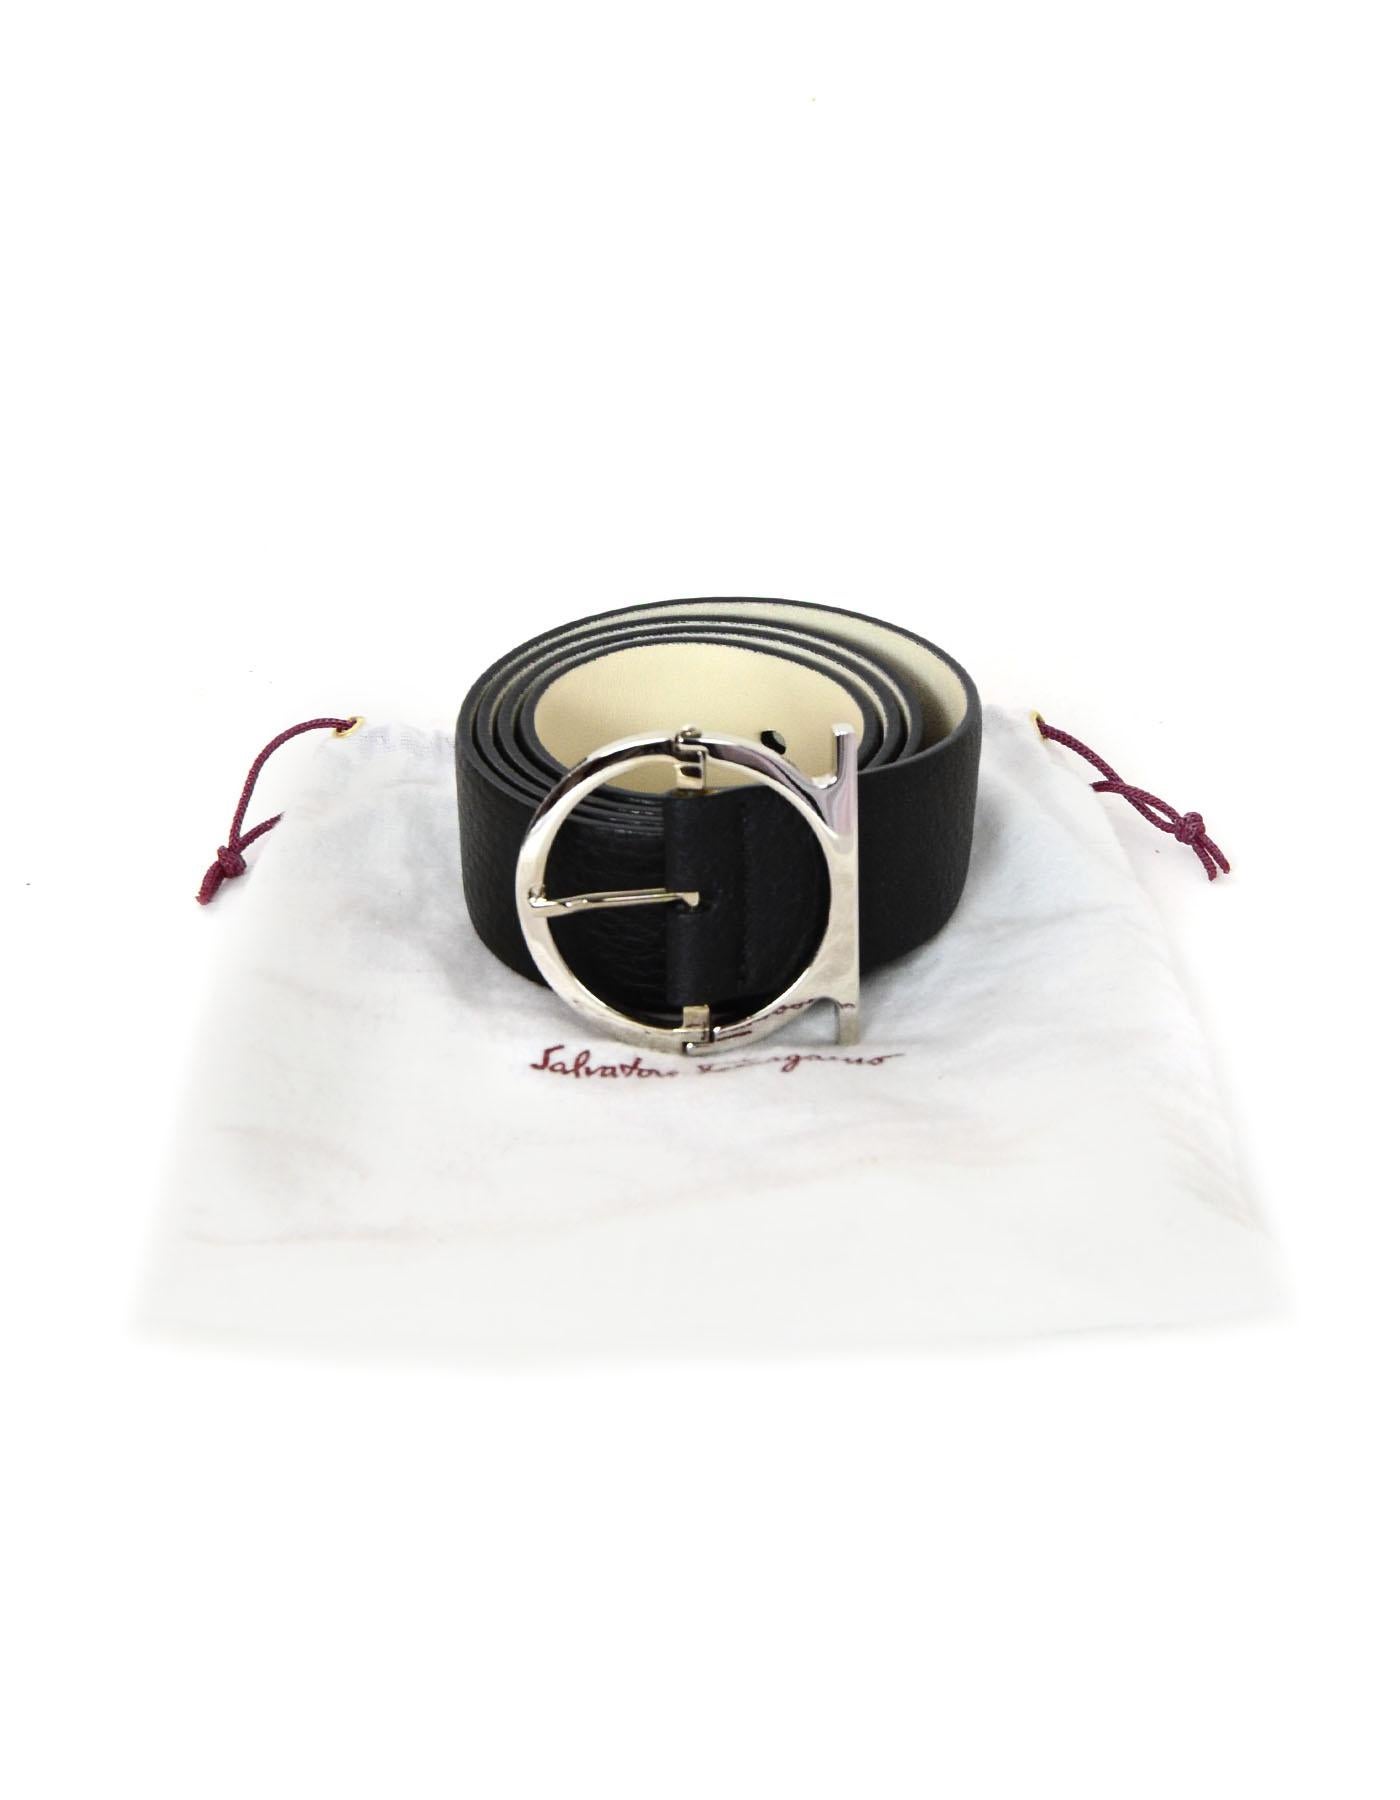 Ferragamo Black/Silver Leather Gancio Belt

Made In: Italy
Materials: Textured leather, metal
Colors: Black, cream, silvertone
Overall Condition: Excellent pre-owned condition, light tarnishing to metal
Includes: Ferragamo dustbag

Measurements: